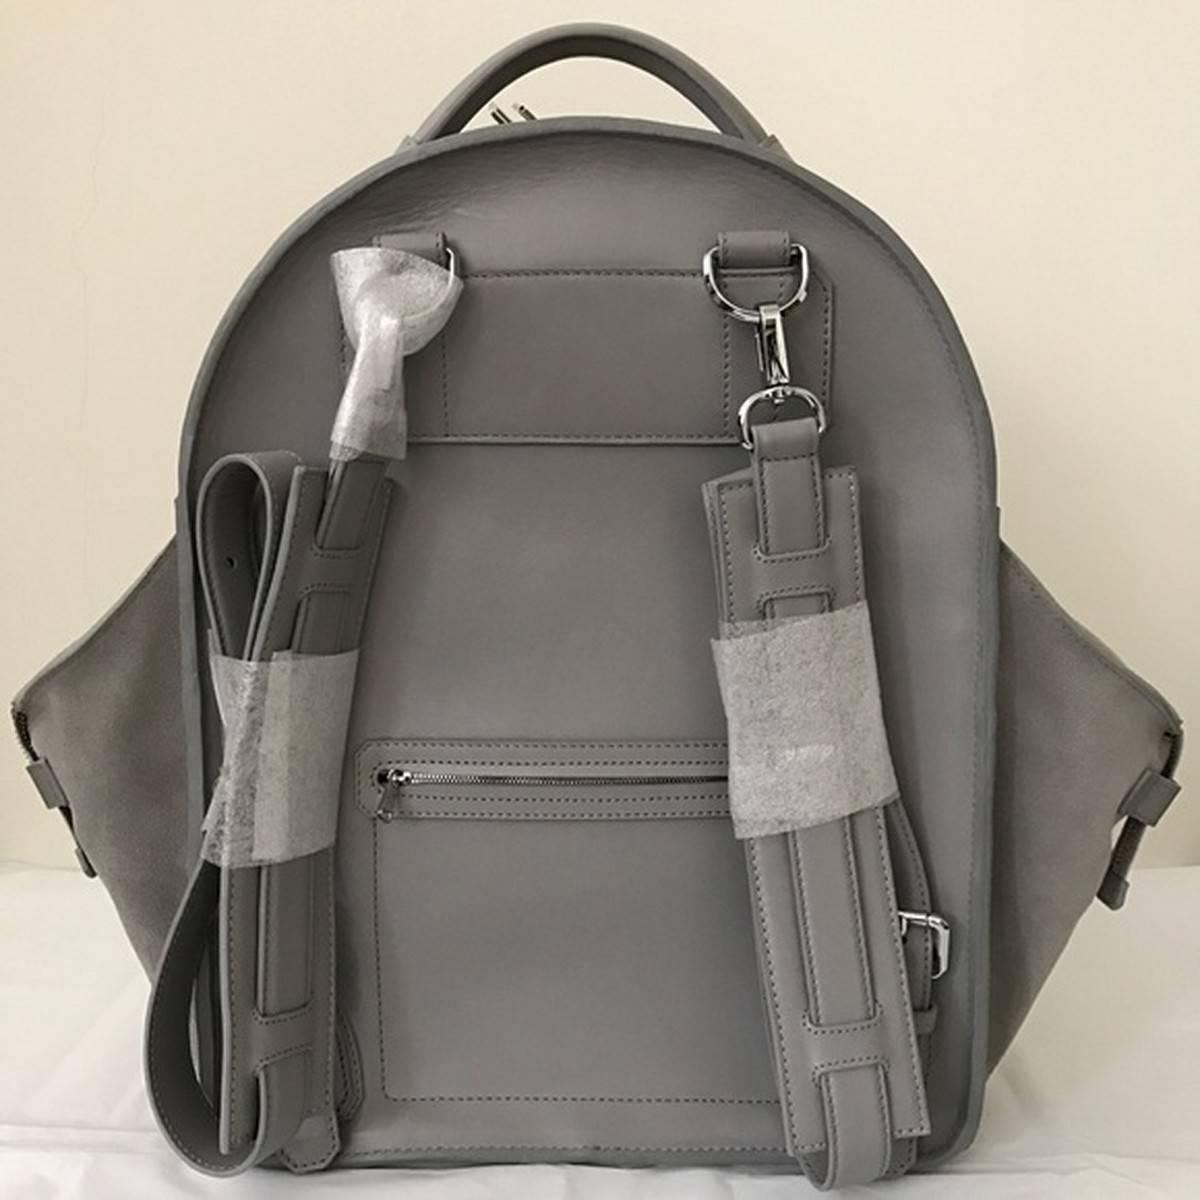 Brand new condition. Large size. Leather with suede side pockets. Back zipper pocket. Silver hardware and lock.
